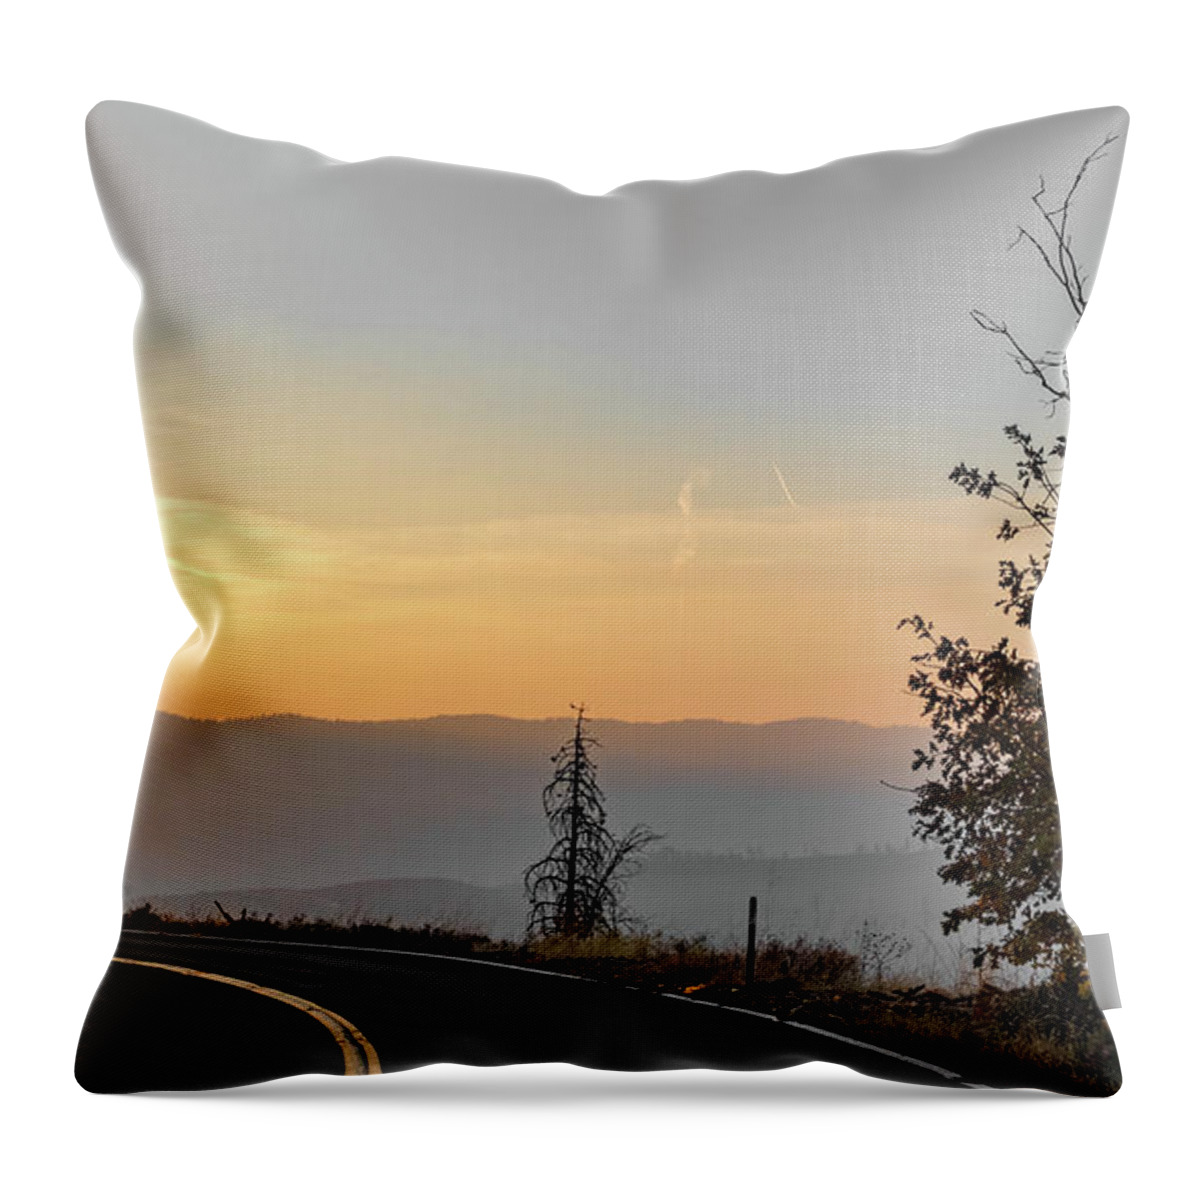 Road Throw Pillow featuring the photograph Road Through Yosemite National Park Early Morning by Alex Grichenko